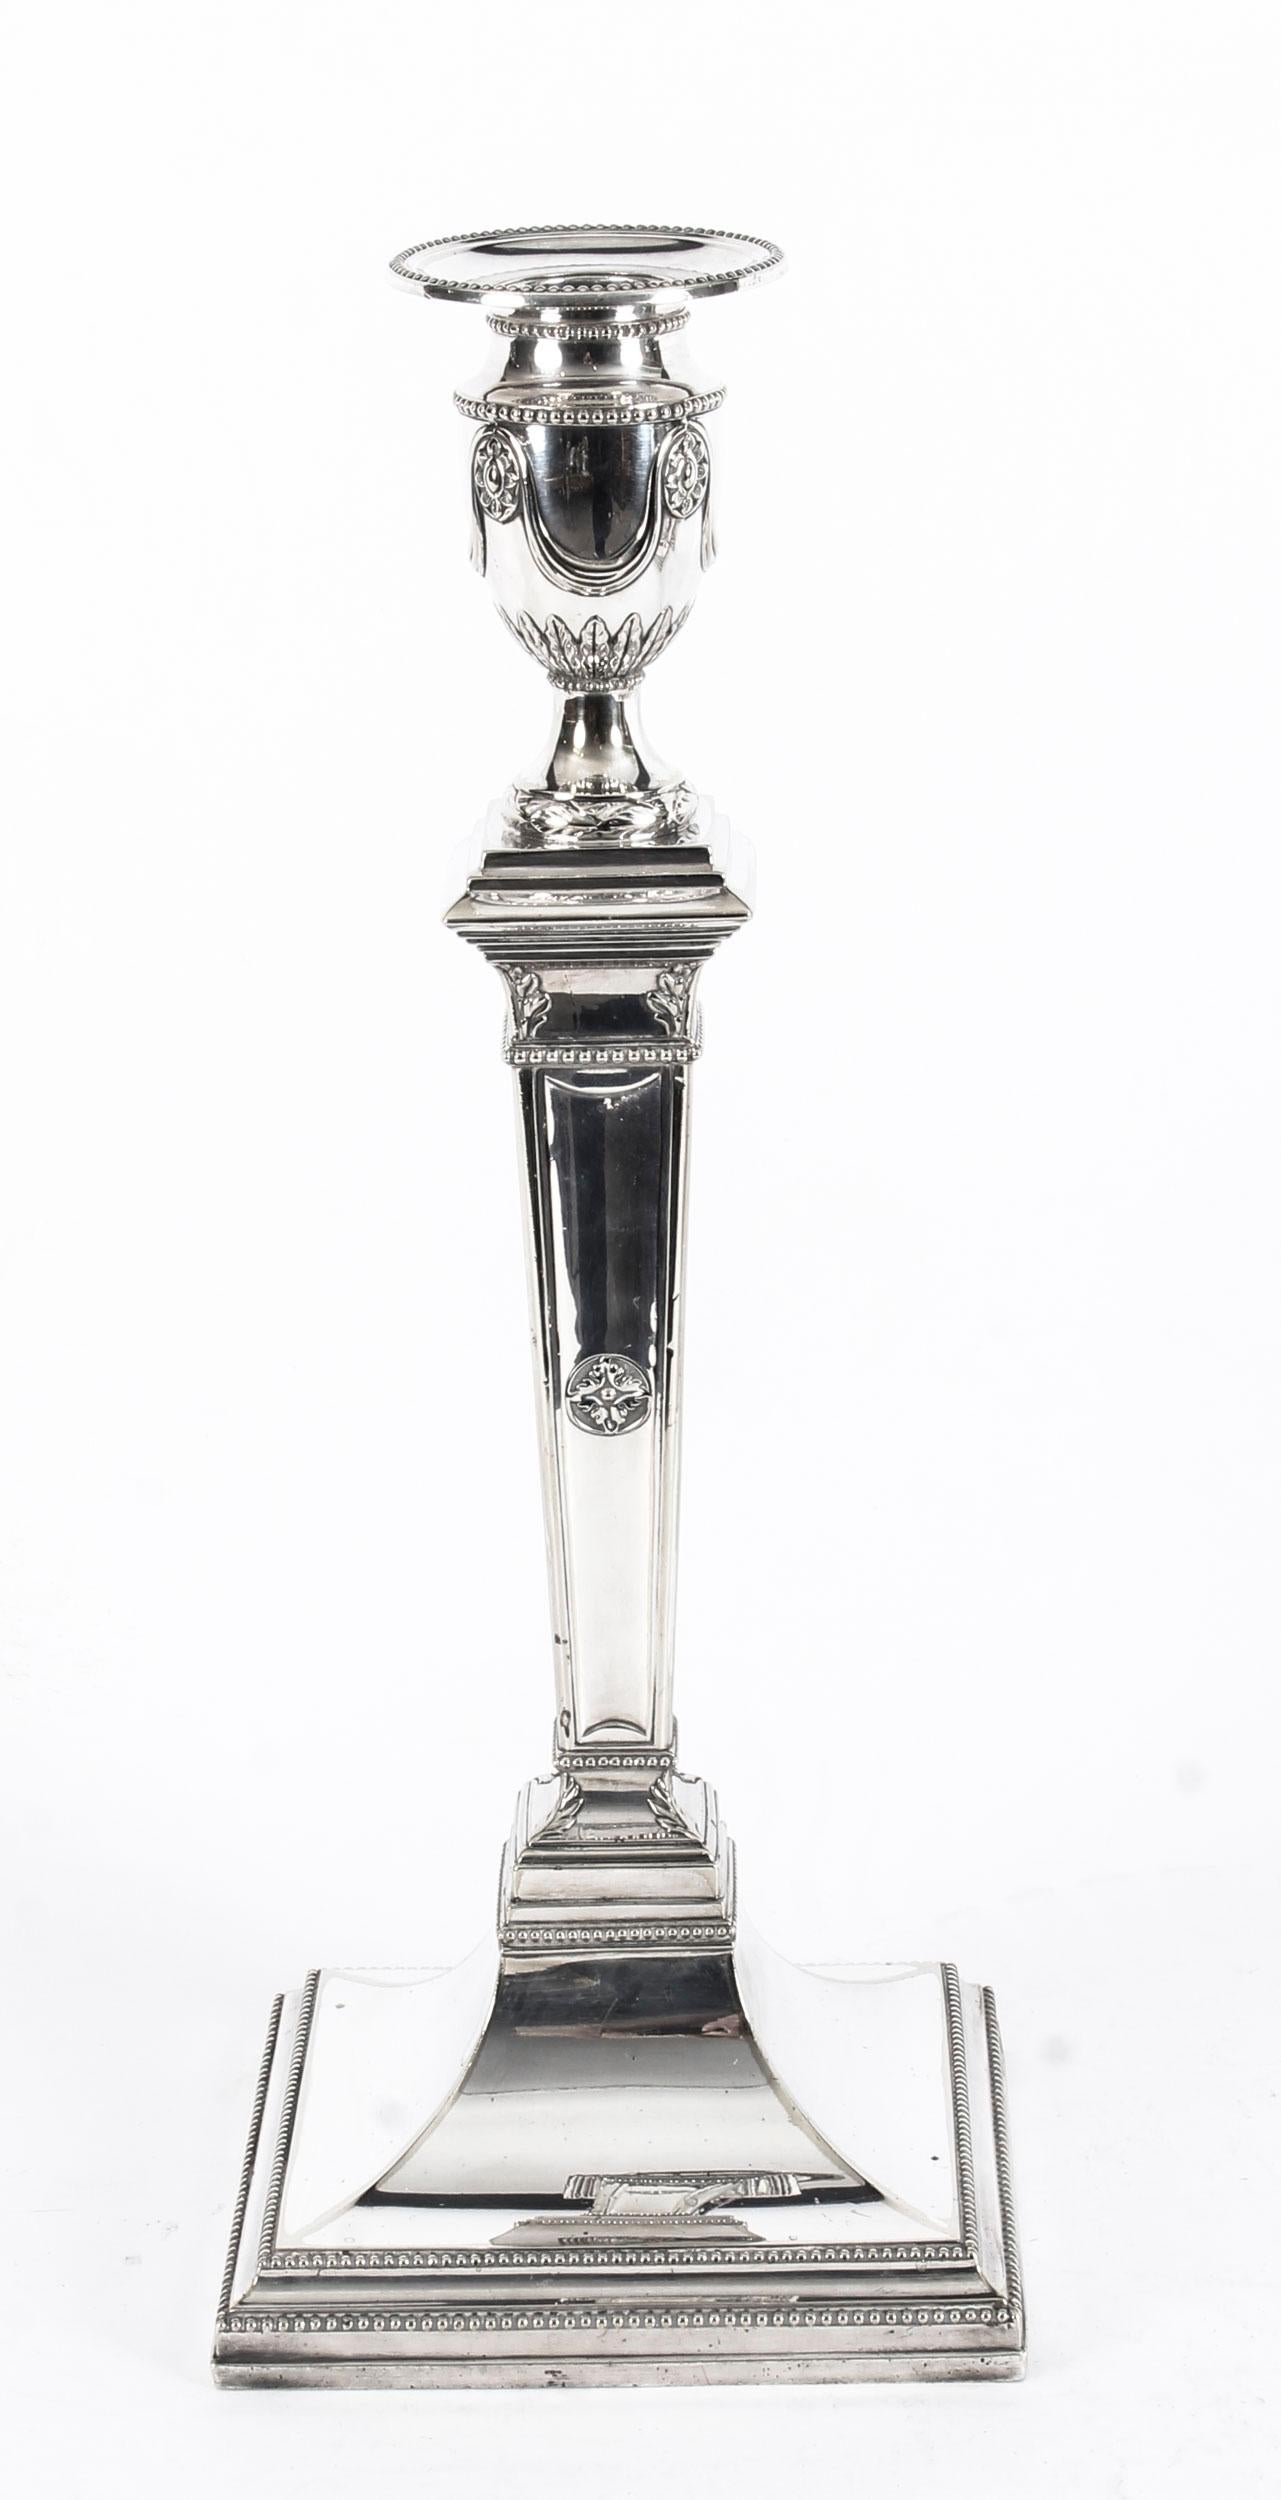 English Antique Set of 4 Silver Plated Candlesticks by James Dixon & Sons, 19th Century